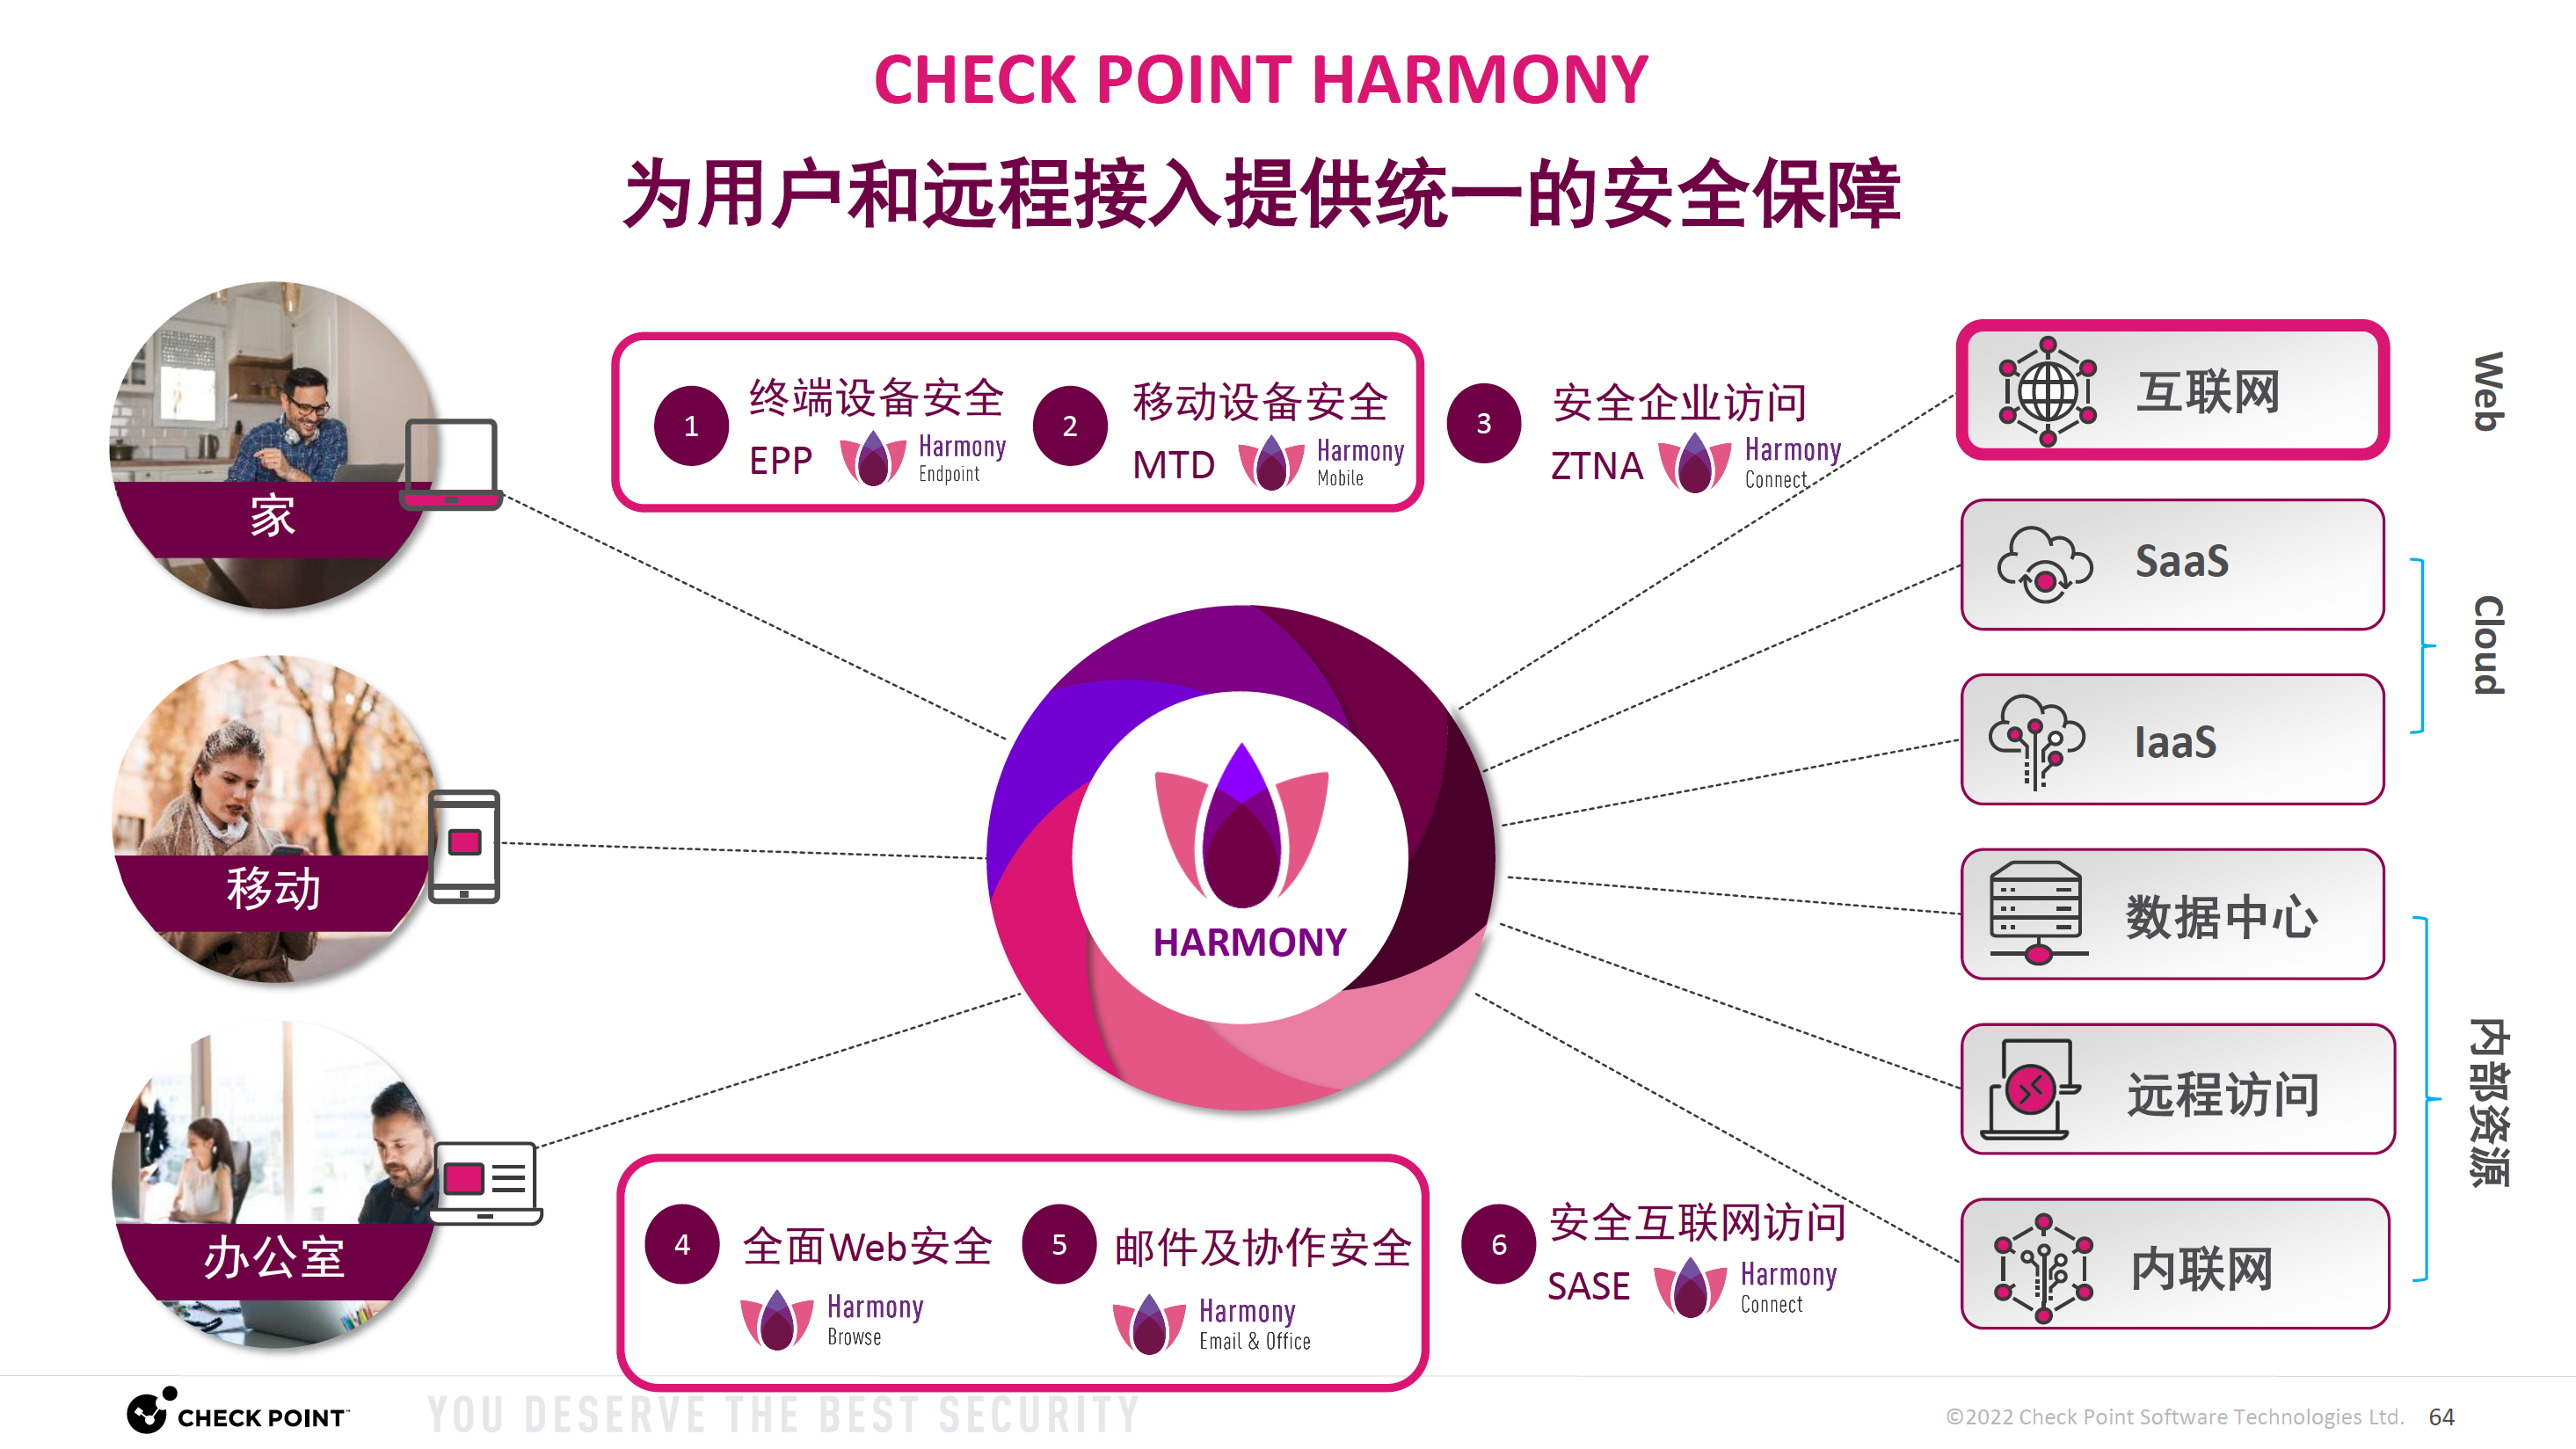 CheckPoint Harmony Email & Collaboration Protect Email、CheckPoint Harmony Email & Collaboration Advanced Protect Email、CheckPoint Harmony Email & Collaboration Complete Protect Email、CheckPoint Email Security、CheckPoint CPEP-SBA-THRET1M-1Y、CheckPoint Harmony Email & Collaboration Protect Email、CheckPoint CPEP-SBA-THRET1M-2Y、CheckPoint Harmony Email & Collaboration Advanced Protect Email、CheckPoint CPEP-SBA-THRET1M-3Y、CheckPoint Harmony Email & Collaboration Complete Protect Email、CheckPoint CPEP-SBA-THRET1Q-1Y、CheckPoint Harmony Email & Collaboration Protect Email and Applications、CheckPoint CPEP-SBA-THRET1Q-2Y、CheckPoint Harmony Email & Collaboration Advanced Protect Email and Applications、CheckPoint CPEP-SBA-THRET1Q-3Y、CheckPoint Harmony Email & Collaboration Complete Protect Email and Applications、CheckPoint CPEP-SBA-THRET1Y-1Y、CheckPoint Email & Collaboration Applications、CheckPoint CP-HAR-BROWSE-1Y、CheckPoint Email Protect Email、CheckPoint CP-HAR-BROWSE-2Y、CheckPoint Email Advanced Protect Email、CheckPoint CP-HAR-BROWSE-3Y、CheckPoint Email Complete Protect Email、CheckPoint CP-HAR-BROWSE-4Y、CheckPoint Email Protect Email and Applications、CheckPoint CP-HAR-BROWSE-5Y、CheckPoint Email Advanced Protect Email and Applications、CheckPoint CP-HAR-ENDPOINT-1Y、CheckPoint Email Complete Protect Email and Applications、CheckPoint CP-HAR-ENDPOINT-2Y、CheckPoint Email Security、CheckPoint CP-HAR-ENDPOINT-3Y、CheckPoint Harmony Email & Collaboration Protect Email、CheckPoint CP-HAR-ENDPOINT-4Y、CheckPoint Harmony Email & Collaboration Advanced Protect Email、CheckPoint CP-HAR-ENDPOINT-5Y、CheckPoint Harmony Email & Collaboration Complete Protect Email、CheckPoint CP-HAR-EP-ADVANCED-1Y、CheckPoint Harmony Email & Collaboration Protect Email and Applications、CheckPoint CP-HAR-EP-ADVANCED-2Y、CheckPoint Harmony Email & Collaboration Advanced Protect Email and Applications、CheckPoint CP-HAR-EP-ADVANCED-3Y、CheckPoint Harmony Email & Collaboration Complete Protect Email and Applications、CheckPoint CP-HAR-EP-ADVANCED-4Y、CheckPoint Email & Collaboration Applications、CheckPoint CP-HAR-EP-ADVANCED-5Y、CheckPoint Email Protect Email、CheckPoint CP-HAR-EP-BASIC-1Y、CheckPoint Email Advanced Protect Email、CheckPoint CP-HAR-EP-BASIC-2Y、CheckPoint Email Complete Protect Email、CheckPoint CP-HAR-EP-BASIC-3Y、CheckPoint Email Protect Email and Applications、CheckPoint CP-HAR-EP-BASIC-4Y、CheckPoint Email Advanced Protect Email and Applications、CheckPoint CP-HAR-EP-BASIC-5Y、CheckPoint Email Complete Protect Email and Applications、CheckPoint CP-HAR-EP-COMPLETE-1Y、CheckPoint Email Security、CheckPoint CP-HAR-EP-COMPLETE-2Y、CheckPoint Harmony Email & Collaboration Protect Email、CheckPoint CP-HAR-EP-COMPLETE-3Y、CheckPoint Harmony Email & Collaboration Advanced Protect Email、CheckPoint CP-HAR-EP-COMPLETE-4Y、CheckPoint Harmony Email & Collaboration Complete Protect Email、CheckPoint CP-HAR-EP-COMPLETE-5Y、CheckPoint Harmony Email & Collaboration Protect Email and Applications、CheckPoint CP-HAR-EP-DATA-1Y、CheckPoint Harmony Email & Collaboration Advanced Protect Email and Applications、CheckPoint CP-HAR-EP-DATA-2Y、CheckPoint Harmony Email & Collaboration Complete Protect Email and Applications、CheckPoint CP-HAR-EP-DATA-3Y、CheckPoint Email & Collaboration Applications、CheckPoint CP-HAR-EP-DATA-4Y、CheckPoint Email Protect Email、CheckPoint CP-HAR-EP-DATA-5Y、CheckPoint Email Advanced Protect Email、CheckPoint CP-HAR-IA-1Y、CheckPoint Email Complete Protect Email、CheckPoint CP-HAR-IA-2Y、CheckPoint Email Protect Email and Applications、CheckPoint CP-HAR-IA-3Y、CheckPoint Email Advanced Protect Email and Applications、CheckPoint CP-HAR-IA-4Y、CheckPoint Email Complete Protect Email and Applications、CheckPoint CP-HAR-IA-5Y、CheckPoint Email Security、CheckPoint CP-HAR-MOBILE-DVC-1Y、CheckPoint Harmony Email & Collaboration Protect Email、CheckPoint CP-HAR-MOBILE-DVC-2Y、CheckPoint Harmony Email & Collaboration Advanced Protect Email、CheckPoint CP-HAR-MOBILE-DVC-3Y、CheckPoint Harmony Email & Collaboration Complete Protect Email、CheckPoint CP-HAR-MOBILE-DVC-4Y、CheckPoint Harmony Email & Collaboration Protect Email and Applications、CheckPoint CP-HAR-MOBILE-DVC-5Y、CheckPoint Harmony Email & Collaboration Advanced Protect Email and Applications、CheckPoint CP-HAR-MOBILE-DVC-EP-ADVANCED-BUN-1Y、CheckPoint Harmony Email & Collaboration Complete Protect Email and Applications、CheckPoint CP-HAR-MOBILE-DVC-EP-ADVANCED-BUN-2Y、CheckPoint Email & Collaboration Applications、CheckPoint CP-HAR-MOBILE-DVC-EP-ADVANCED-BUN-3Y、CheckPoint Email Protect Email、CheckPoint CP-HAR-MOBILE-DVC-EP-ADVANCED-BUN-4Y、CheckPoint Email Advanced Protect Email、CheckPoint CP-HAR-MOBILE-DVC-EP-ADVANCED-BUN-5Y、CheckPoint Email Complete Protect Email、CheckPoint CP-HAR-MOBILE-DVC-EP-COMPLETE-BUN-1Y、CheckPoint Email Protect Email and Applications、CheckPoint CP-HAR-MOBILE-DVC-EP-COMPLETE-BUN-2Y、CheckPoint Email Advanced Protect Email and Applications、CheckPoint CP-HAR-MOBILE-DVC-EP-COMPLETE-BUN-3Y、CheckPoint Email Complete Protect Email and Applications、CheckPoint CP-HAR-MOBILE-DVC-EP-COMPLETE-BUN-4Y、CheckPoint Email Security、CheckPoint CP-HAR-MOBILE-DVC-EP-COMPLETE-BUN-5Y、CheckPoint Harmony Email & Collaboration Protect Email、CheckPoint CP-HAR-MOBILE-USR3D-1Y、CheckPoint Harmony Email & Collaboration Advanced Protect Email、CheckPoint CP-HAR-MOBILE-USR3D-2Y、CheckPoint Harmony Email & Collaboration Complete Protect Email、CheckPoint CP-HAR-MOBILE-USR3D-3Y、CheckPoint Harmony Email & Collaboration Protect Email and Applications、CheckPoint CP-HAR-MOBILE-USR3D-4Y、CheckPoint Harmony Email & Collaboration Advanced Protect Email and Applications、CheckPoint CP-HAR-MOBILE-USR3D-5Y、CheckPoint Harmony Email & Collaboration Complete Protect Email and Applications、CheckPoint CP-HAR-RA-1Y、CheckPoint Email & Collaboration Applications、CheckPoint CP-HAR-RA-2Y、CheckPoint Email Protect Email、CheckPoint CP-HAR-RA-3Y、CheckPoint Email Advanced Protect Email、CheckPoint CP-HAR-RA-4Y、CheckPoint Email Complete Protect Email、CheckPoint CP-HAR-RA-5Y、CheckPoint Email Protect Email and Applications、CheckPoint CP-HAR-TOTAL-1Y、CheckPoint Email Advanced Protect Email and Applications、CheckPoint CP-HAR-TOTAL-2Y、CheckPoint Email Complete Protect Email and Applications、CheckPoint CP-HAR-TOTAL-3Y、CheckPoint Email Security、CheckPoint CP-HAR-TOTAL-4Y、CheckPoint Harmony Email & Collaboration Protect Email、CheckPoint CP-HAR-TOTAL-5Y、CheckPoint Harmony Email & Collaboration Advanced Protect Email、CheckPoint CPSM-P1003-E、CheckPoint Harmony Email & Collaboration Complete Protect Email、CheckPoint CPSM-P2503-E、CheckPoint Harmony Email & Collaboration Protect Email and Applications、CheckPoint CPSM-PU003-E、CheckPoint Harmony Email & Collaboration Advanced Protect Email and Applications、CheckPoint CP-HAR-EC-PROTECT-EMAIL-1Y、CheckPoint Harmony Email & Collaboration Complete Protect Email and Applications、CheckPoint CP-HAR-EC-PROTECT-EMAIL-2Y、CheckPoint Email & Collaboration Applications、CheckPoint CP-HAR-EC-PROTECT-EMAIL-3Y、CheckPoint Email Protect Email、CheckPoint CP-HAR-EC-PROTECT-EMAIL-4Y、CheckPoint Email Advanced Protect Email、CheckPoint CP-HAR-EC-PROTECT-EMAIL-5Y、CheckPoint Email Complete Protect Email、CheckPoint CP-HAR-EC-ADV-EMAIL-1Y、CheckPoint Email Protect Email and Applications、CheckPoint CP-HAR-EC-ADV-EMAIL-2Y、CheckPoint Email Advanced Protect Email and Applications、CheckPoint CP-HAR-EC-ADV-EMAIL-3Y、CheckPoint Email Complete Protect Email and Applications、CheckPoint CP-HAR-EC-ADV-EMAIL-4Y、CheckPoint Email Security、CheckPoint CP-HAR-EC-ADV-EMAIL-5Y、CheckPoint Harmony Email & Collaboration Protect Email、CheckPoint CP-HAR-EC-COMP-EMAIL-1Y、CheckPoint Harmony Email & Collaboration Advanced Protect Email、CheckPoint CP-HAR-EC-COMP-EMAIL-2Y、CheckPoint Harmony Email & Collaboration Complete Protect Email、CheckPoint CP-HAR-EC-COMP-EMAIL-3Y、CheckPoint Harmony Email & Collaboration Protect Email and Applications、CheckPoint CP-HAR-EC-COMP-EMAIL-4Y、CheckPoint Harmony Email & Collaboration Advanced Protect Email and Applications、CheckPoint CP-HAR-EC-COMP-EMAIL-5Y、CheckPoint Harmony Email & Collaboration Complete Protect Email and Applications、CheckPoint CP-HAR-EC-PROTECT-EMAIL-APPS-1Y、CheckPoint Email & Collaboration Applications、CheckPoint CP-HAR-EC-PROTECT-EMAIL-APPS-2Y、CheckPoint Email Protect Email、CheckPoint CP-HAR-EC-PROTECT-EMAIL-APPS-3Y、CheckPoint Email Advanced Protect Email、CheckPoint CP-HAR-EC-PROTECT-EMAIL-APPS-4Y、CheckPoint Email Complete Protect Email、CheckPoint CP-HAR-EC-PROTECT-EMAIL-APPS-5Y、CheckPoint Email Protect Email and Applications、CheckPoint CP-HAR-EC-ADV-EMAIL-APPS-1Y、CheckPoint Email Advanced Protect Email and Applications、CheckPoint CP-HAR-EC-ADV-EMAIL-APPS-2Y、CheckPoint Email Complete Protect Email and Applications、CheckPoint CP-HAR-EC-ADV-EMAIL-APPS-3Y、CheckPoint Email Security、CheckPoint CP-HAR-EC-ADV-EMAIL-APPS-4Y、CheckPoint Harmony Email & Collaboration Protect Email、CheckPoint CP-HAR-EC-ADV-EMAIL-APPS-5Y、CheckPoint Harmony Email & Collaboration Advanced Protect Email、CheckPoint CP-HAR-EC-COMP-EMAIL-APPS-1Y、CheckPoint Harmony Email & Collaboration Complete Protect Email、CheckPoint CP-HAR-EC-COMP-EMAIL-APPS-2Y、CheckPoint Harmony Email & Collaboration Protect Email and Applications、CheckPoint CP-HAR-EC-COMP-EMAIL-APPS-3Y、CheckPoint Harmony Email & Collaboration Advanced Protect Email and Applications、CheckPoint CP-HAR-EC-COMP-EMAIL-APPS-4Y、CheckPoint Harmony Email & Collaboration Complete Protect Email and Applications、CheckPoint CP-HAR-EC-COMP-EMAIL-APPS-5Y、CheckPoint Email & Collaboration Applications、CheckPoint CPEP-SBA-THRET1Y-2Y、CheckPoint Email Protect Email、CheckPoint CPEP-SBA-THRET1Y-3Y、CheckPoint Email Advanced Protect Email、CheckPoint CP-HAR-EC-ADV-EMAIL-APPS-STU-1Y、CheckPoint Email Complete Protect Email、CheckPoint CP-HAR-EC-ADV-EMAIL-APPS-STU-2Y、CheckPoint Email Protect Email and Applications、CheckPoint CP-HAR-EC-ADV-EMAIL-APPS-STU-3Y、CheckPoint Email Advanced Protect Email and Applications、CheckPoint CP-HAR-EC-ADV-EMAIL-APPS-STU-4Y、CheckPoint Email Complete Protect Email and Applications、CheckPoint CP-HAR-EC-ADV-EMAIL-APPS-STU-5Y、CheckPoint Email Security、CheckPoint CP-HAR-EC-PROTECT-EMAIL-APPS-STU-4Y、CheckPoint Harmony Email & Collaboration Protect Email、CheckPoint CP-HAR-EC-PROTECT-EMAIL-APPS-STU-5Y、CheckPoint Harmony Email & Collaboration Advanced Protect Email、CheckPoint CP-HAR-EC-COMP-EMAIL-APPS-STU-5Y、CheckPoint Harmony Email & Collaboration Complete Protect Email、CheckPoint CP-HAR-EC-COMP-EMAIL-APPS-STU-4Y、CheckPoint Harmony Email & Collaboration Protect Email and Applications、CheckPoint CP-HAR-EC-COMP-EMAIL-APPS-STU-3Y、CheckPoint Harmony Email & Collaboration Advanced Protect Email and Applications、CheckPoint CP-HAR-EC-COMP-EMAIL-APPS-STU-2Y、CheckPoint Harmony Email & Collaboration Complete Protect Email and Applications、CheckPoint CP-HAR-EC-COMP-EMAIL-APPS-STU-1Y、CheckPoint Email & Collaboration Applications、CheckPoint CP-HAR-EC-ADV-EMAIL-STU-3Y、CheckPoint Email Protect Email、CheckPoint CP-HAR-EC-ADV-EMAIL-STU-2Y、CheckPoint Email Advanced Protect Email、CheckPoint CP-HAR-EC-ADV-EMAIL-STU-1Y、CheckPoint Email Complete Protect Email、CheckPoint CP-HAR-EC-PROTECT-EMAIL-APPS-STU-2Y、CheckPoint Email Protect Email and Applications、CheckPoint CP-HAR-EC-PROTECT-EMAIL-APPS-STU-3Y、CheckPoint Email Advanced Protect Email and Applications、CheckPoint CP-HAR-EC-PROTECT-EMAIL-APPS-STU-1Y、CheckPoint Email Complete Protect Email and Applications、CheckPoint CP-HAR-EC-ADV-EMAIL-STU-5Y、CheckPoint Email Security、CheckPoint CP-HAR-EC-ADV-EMAIL-STU-4Y、CheckPoint Harmony Email & Collaboration Protect Email、CheckPoint CP-HAR-EC-COMP-EMAIL-STU-1Y、CheckPoint Harmony Email & Collaboration Advanced Protect Email、CheckPoint CP-HAR-EC-COMP-EMAIL-STU-2Y、CheckPoint Harmony Email & Collaboration Complete Protect Email、CheckPoint CP-HAR-EC-COMP-EMAIL-STU-3Y、CheckPoint Harmony Email & Collaboration Protect Email and Applications、CheckPoint CP-HAR-EC-COMP-EMAIL-STU-4Y、CheckPoint Harmony Email & Collaboration Advanced Protect Email and Applications、CheckPoint CP-HAR-EC-COMP-EMAIL-STU-5Y、CheckPoint Harmony Email & Collaboration Complete Protect Email and Applications、CheckPoint CP-HAR-EC-PROTECT-EMAIL-STU-5Y、CheckPoint Email & Collaboration Applications、CheckPoint CP-HAR-EC-PROTECT-EMAIL-STU-4Y、CheckPoint Email Protect Email、CheckPoint CP-HAR-EC-PROTECT-EMAIL-STU-3Y、CheckPoint Email Advanced Protect Email、CheckPoint CP-HAR-EC-PROTECT-EMAIL-STU-2Y、CheckPoint Email Complete Protect Email、CheckPoint CP-HAR-EC-PROTECT-EMAIL-STU-1Y、CheckPoint Email Protect Email and Applications、CheckPoint CP-HAR-EC-ADV-EMAIL-APPS-LIGHT-3Y、CheckPoint Email Advanced Protect Email and Applications、CheckPoint CP-HAR-EC-ADV-EMAIL-APPS-LIGHT-2Y、CheckPoint Email Complete Protect Email and Applications、CheckPoint CP-HAR-EC-ADV-EMAIL-APPS-LIGHT-1Y、CheckPoint Email Security、CheckPoint CP-HAR-EC-ADV-EMAIL-LIGHT-3Y、CheckPoint Harmony Email & Collaboration Protect Email、CheckPoint CP-HAR-EC-ADV-EMAIL-LIGHT-2Y、CheckPoint Harmony Email & Collaboration Advanced Protect Email、CheckPoint CP-HAR-EC-ADV-EMAIL-LIGHT-1Y、CheckPoint Harmony Email & Collaboration Complete Protect Email、CheckPoint CP-HAR-SAAS-API-5Y、CheckPoint Harmony Email & Collaboration Protect Email and Applications、CheckPoint CP-HAR-SAAS-API-4Y、CheckPoint Harmony Email & Collaboration Advanced Protect Email and Applications、CheckPoint CP-HAR-SAAS-API-1Y、CheckPoint Harmony Email & Collaboration Complete Protect Email and Applications、CheckPoint CP-HAR-SAAS-API-3Y、CheckPoint Email & Collaboration Applications、CheckPoint CP-HAR-SAAS-API-2Y、